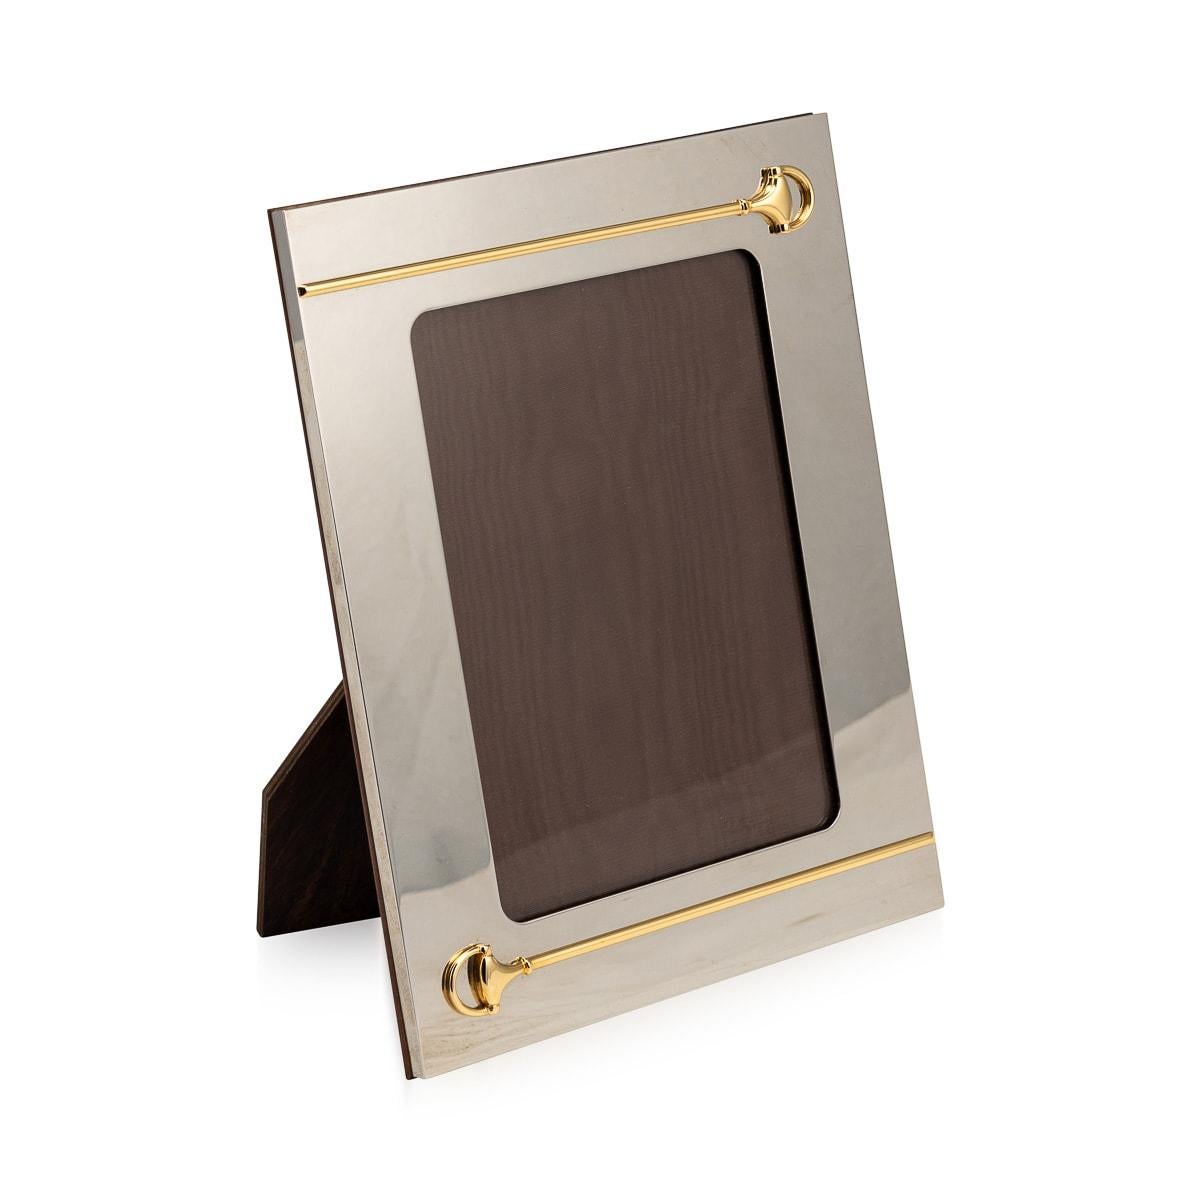 Modern 20th Century Silver Plated Gucci Photograph Frame, Italy c.1980 For Sale